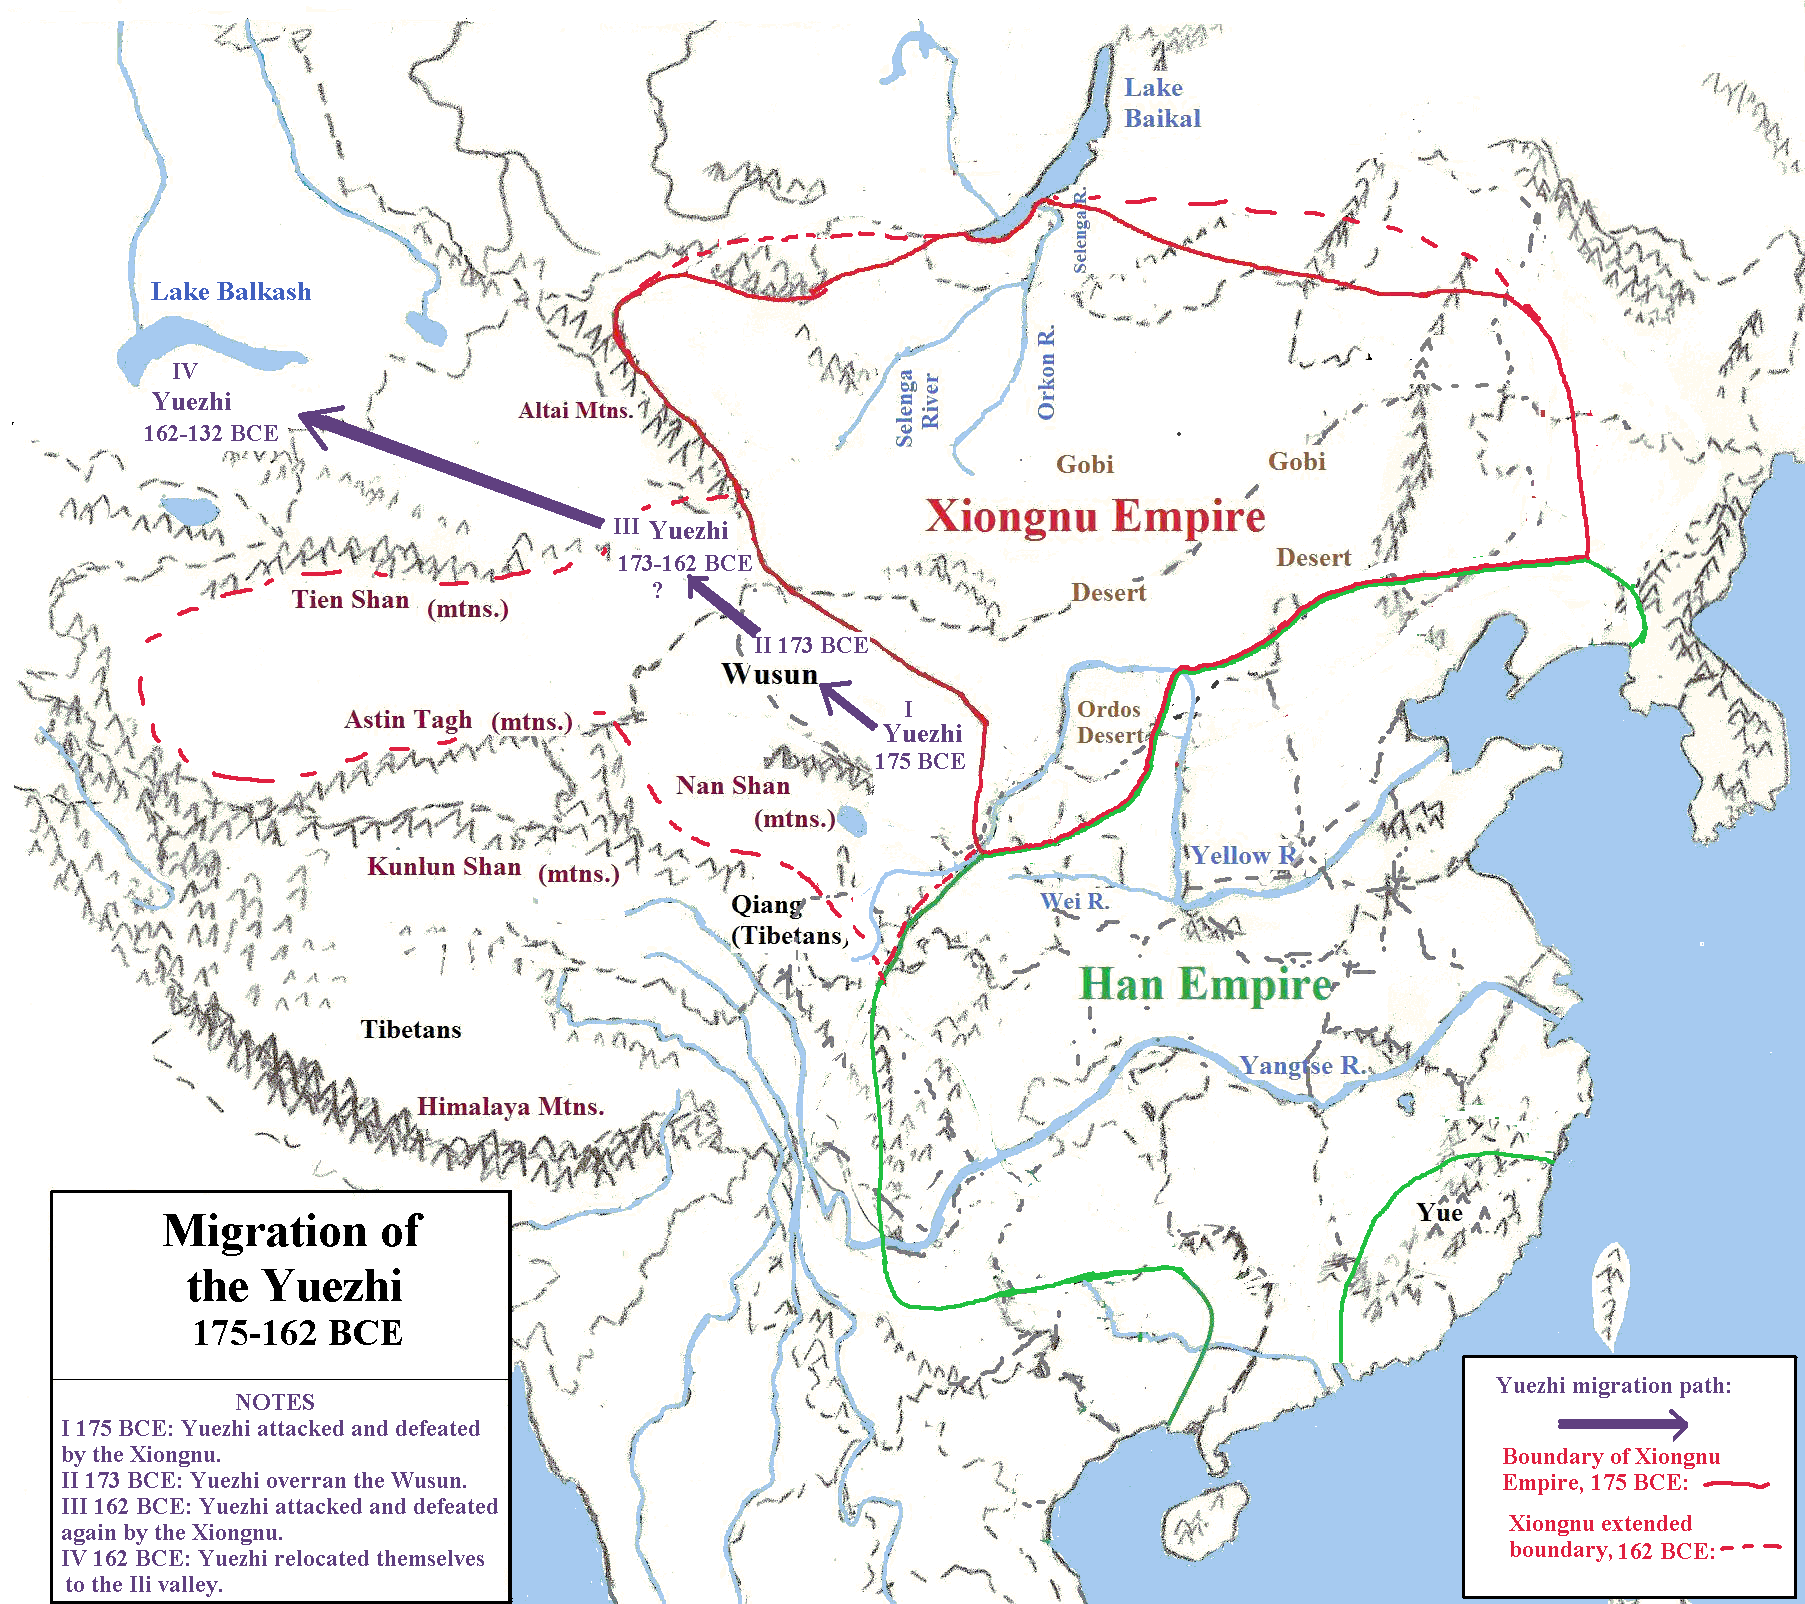 Map showing Yuezhi migration from 175 to 161 BCE